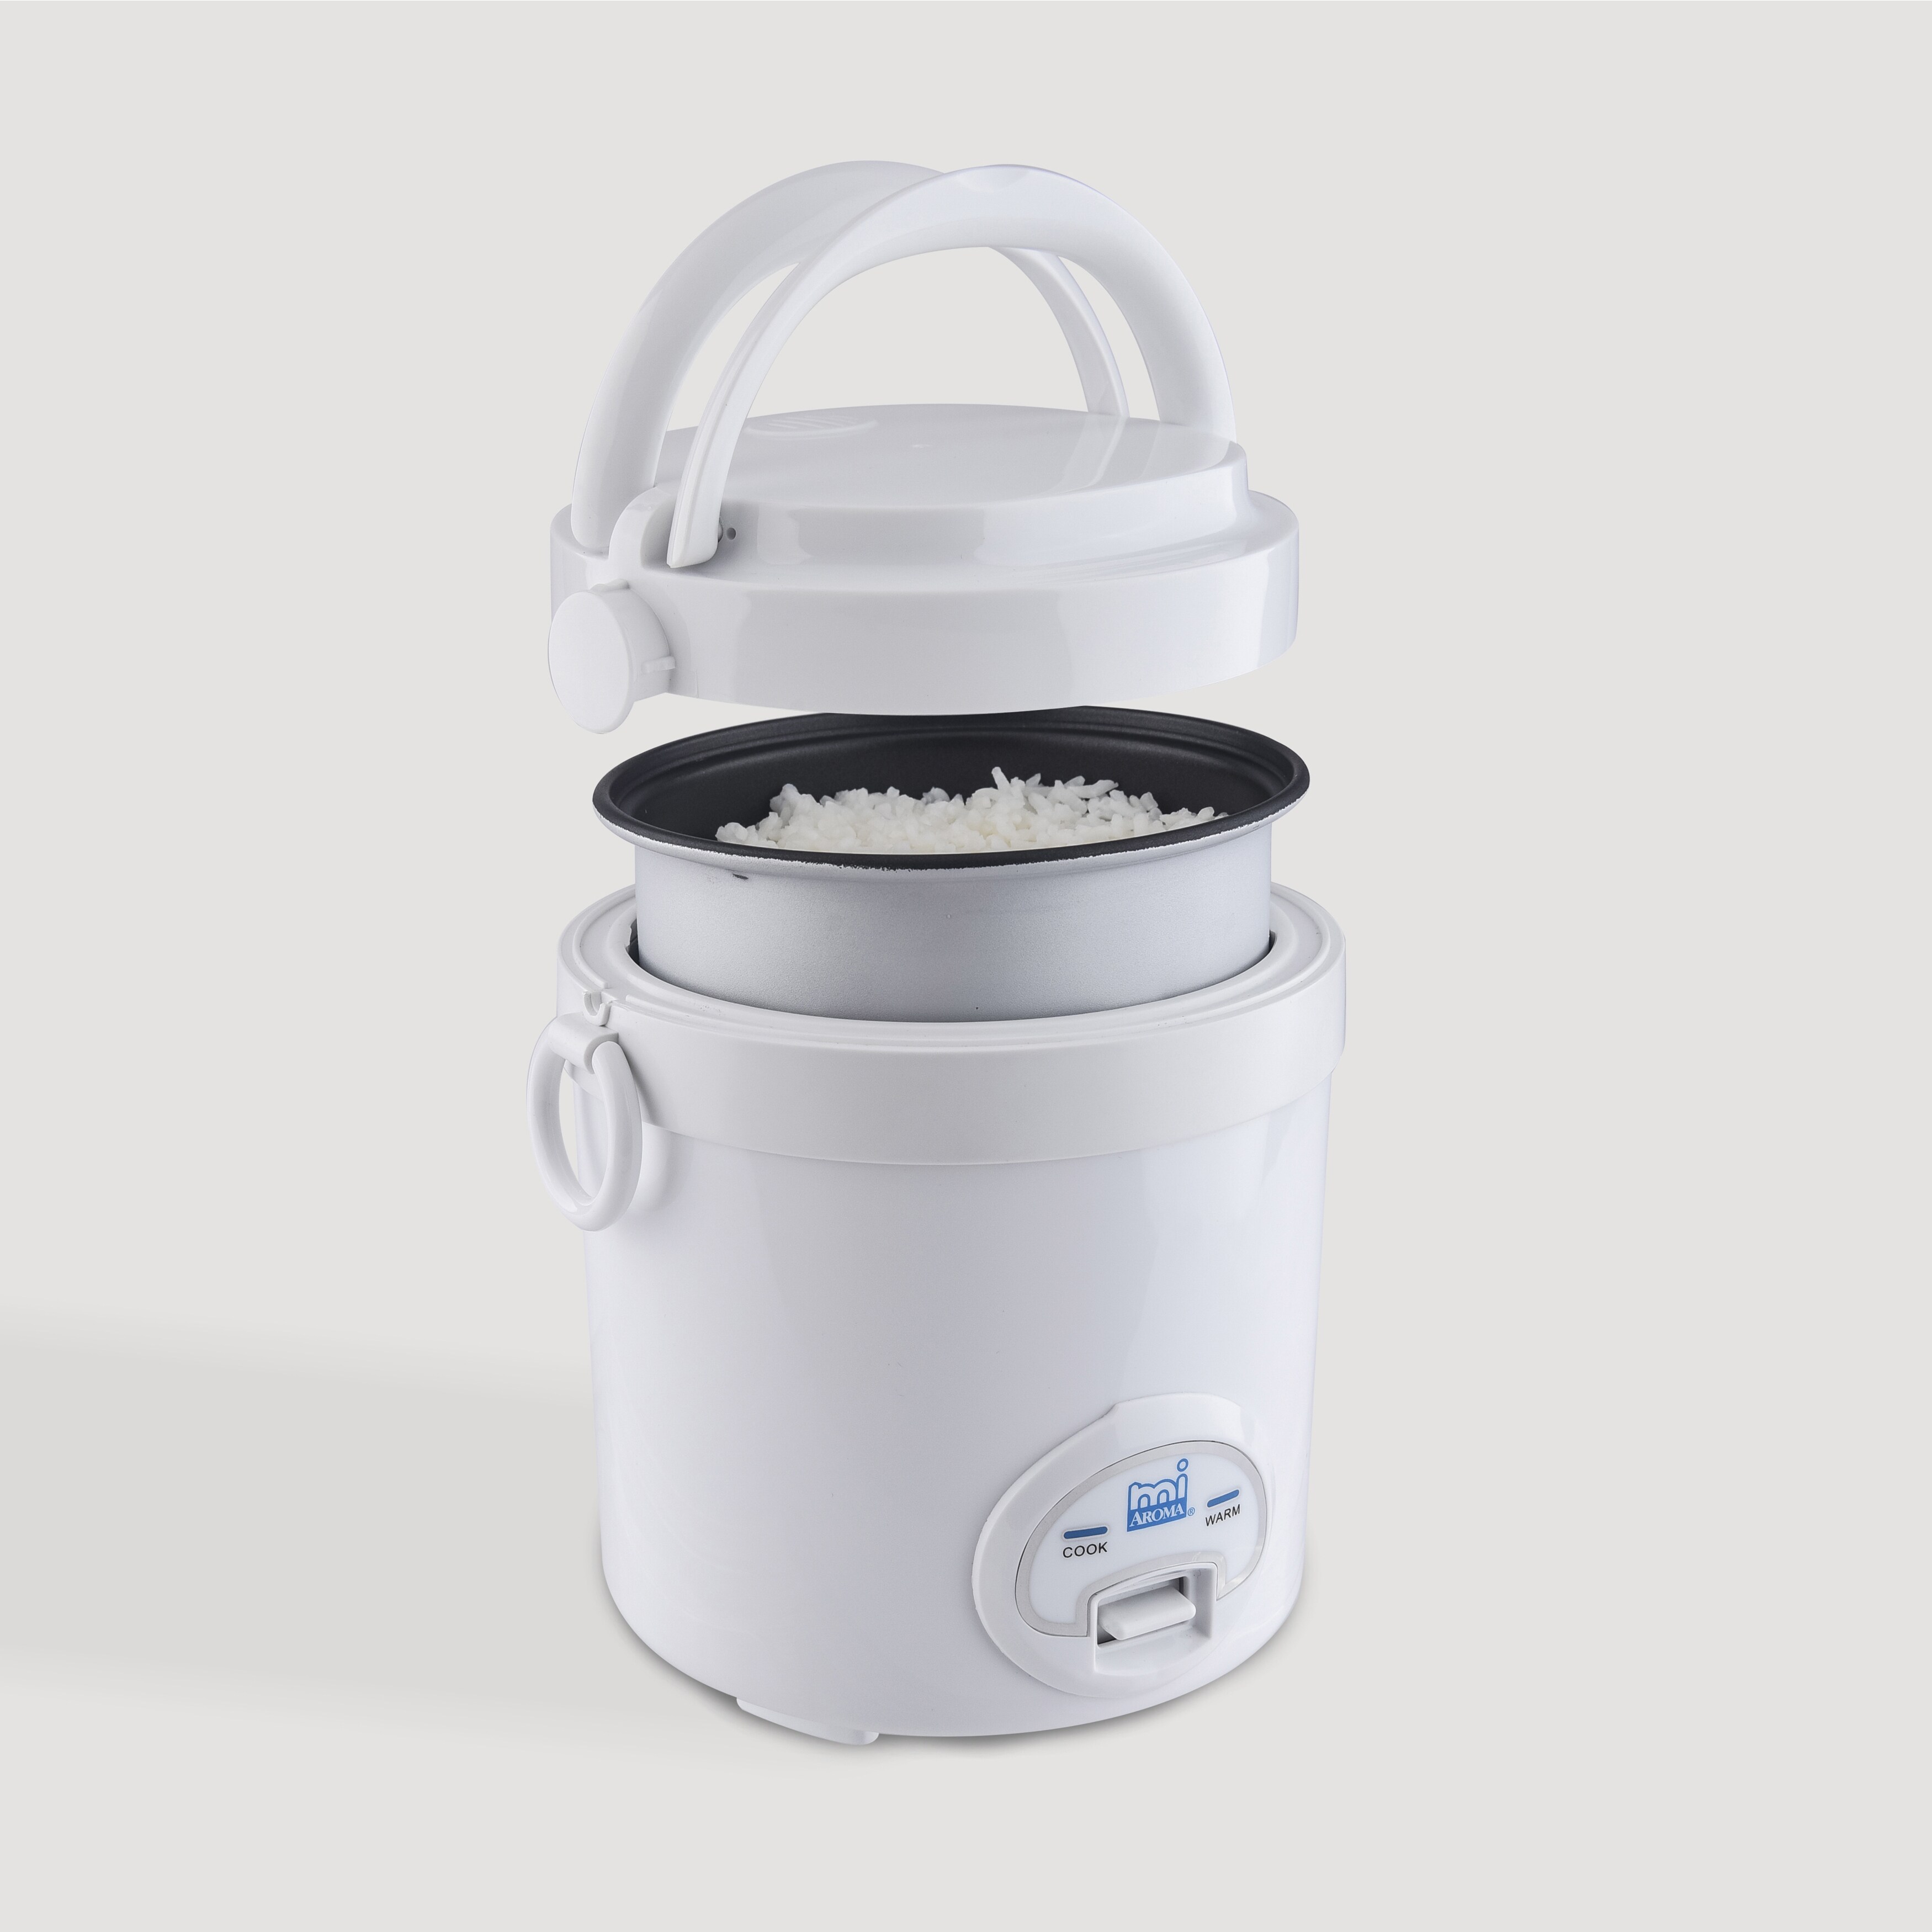 https://ak1.ostkcdn.com/images/products/12615776/Aroma-3-cup-Cool-Touch-Rice-Cooker-fcfefefd-5ba1-46cc-be8d-e8501ec470ad.jpg